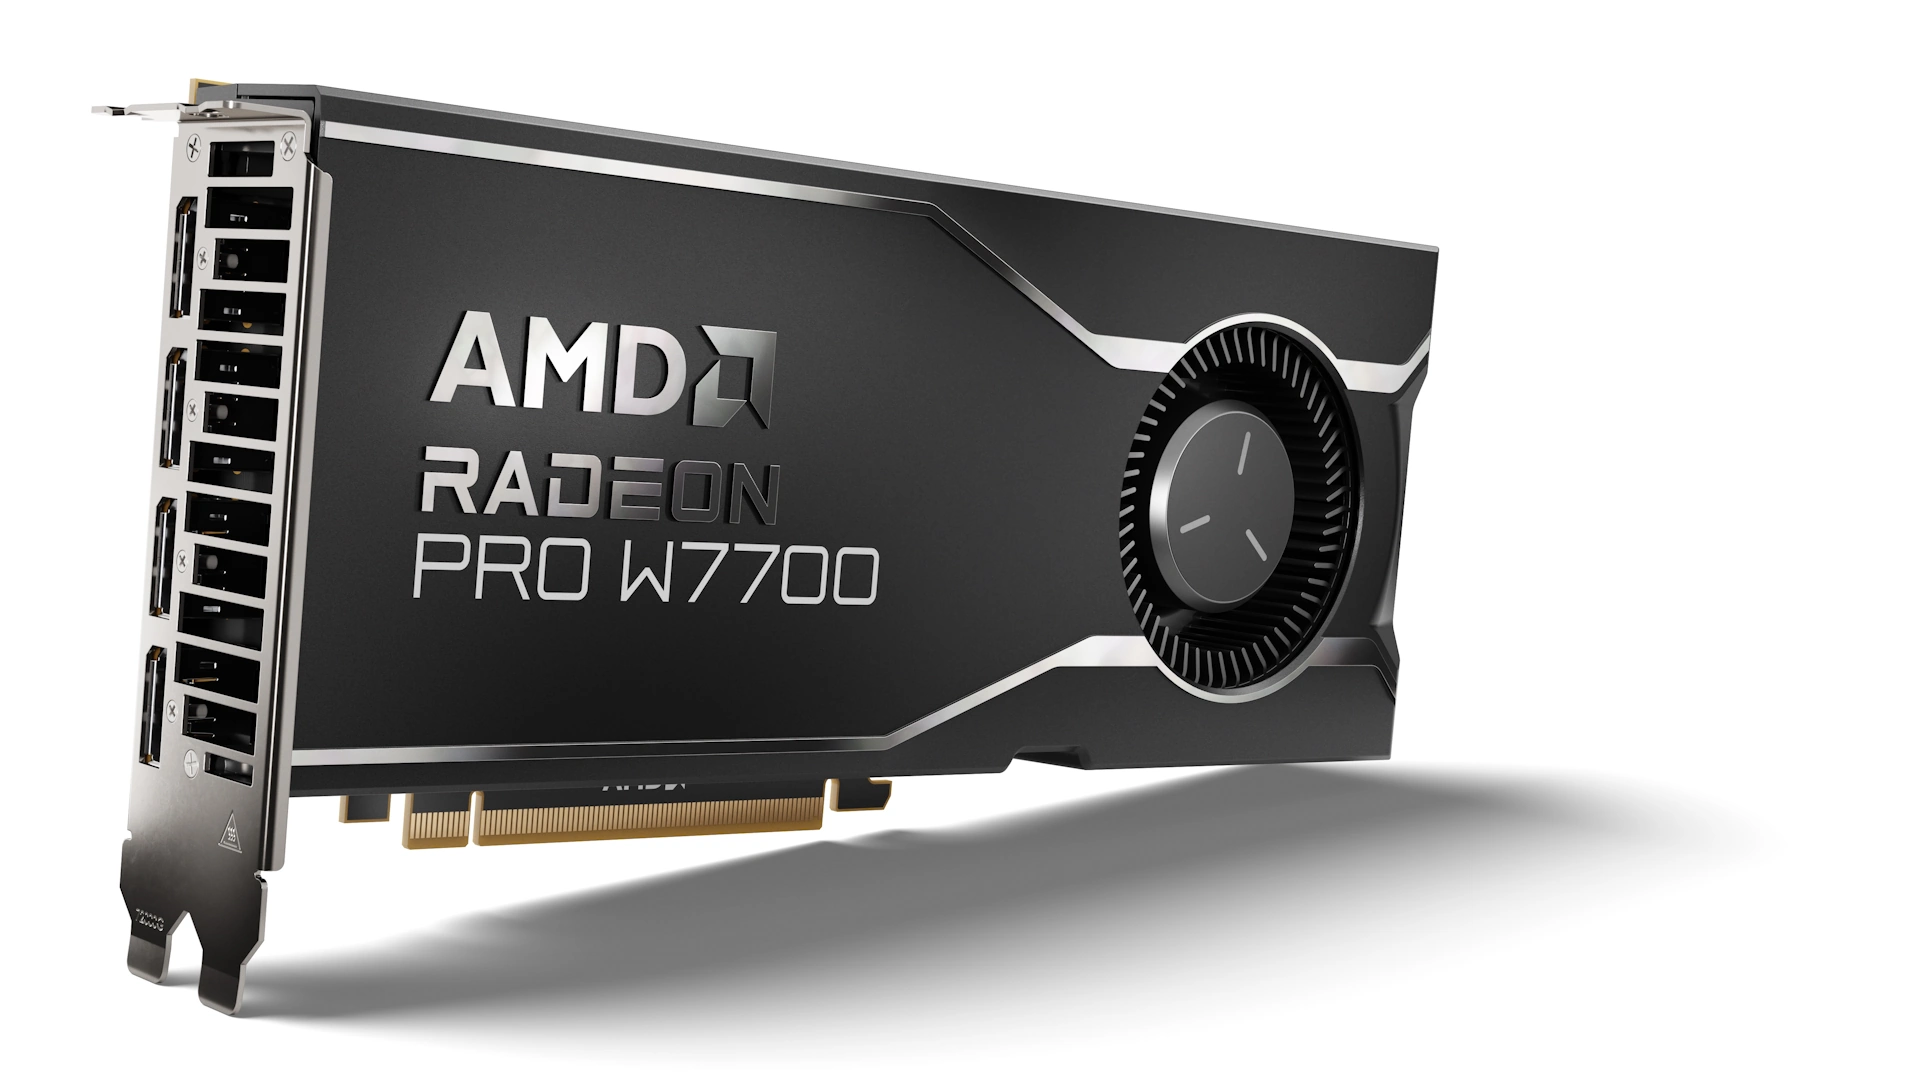 New AMD Radeon PRO workstation graphics card accelerates next-generation professional content, CAD and AI applications